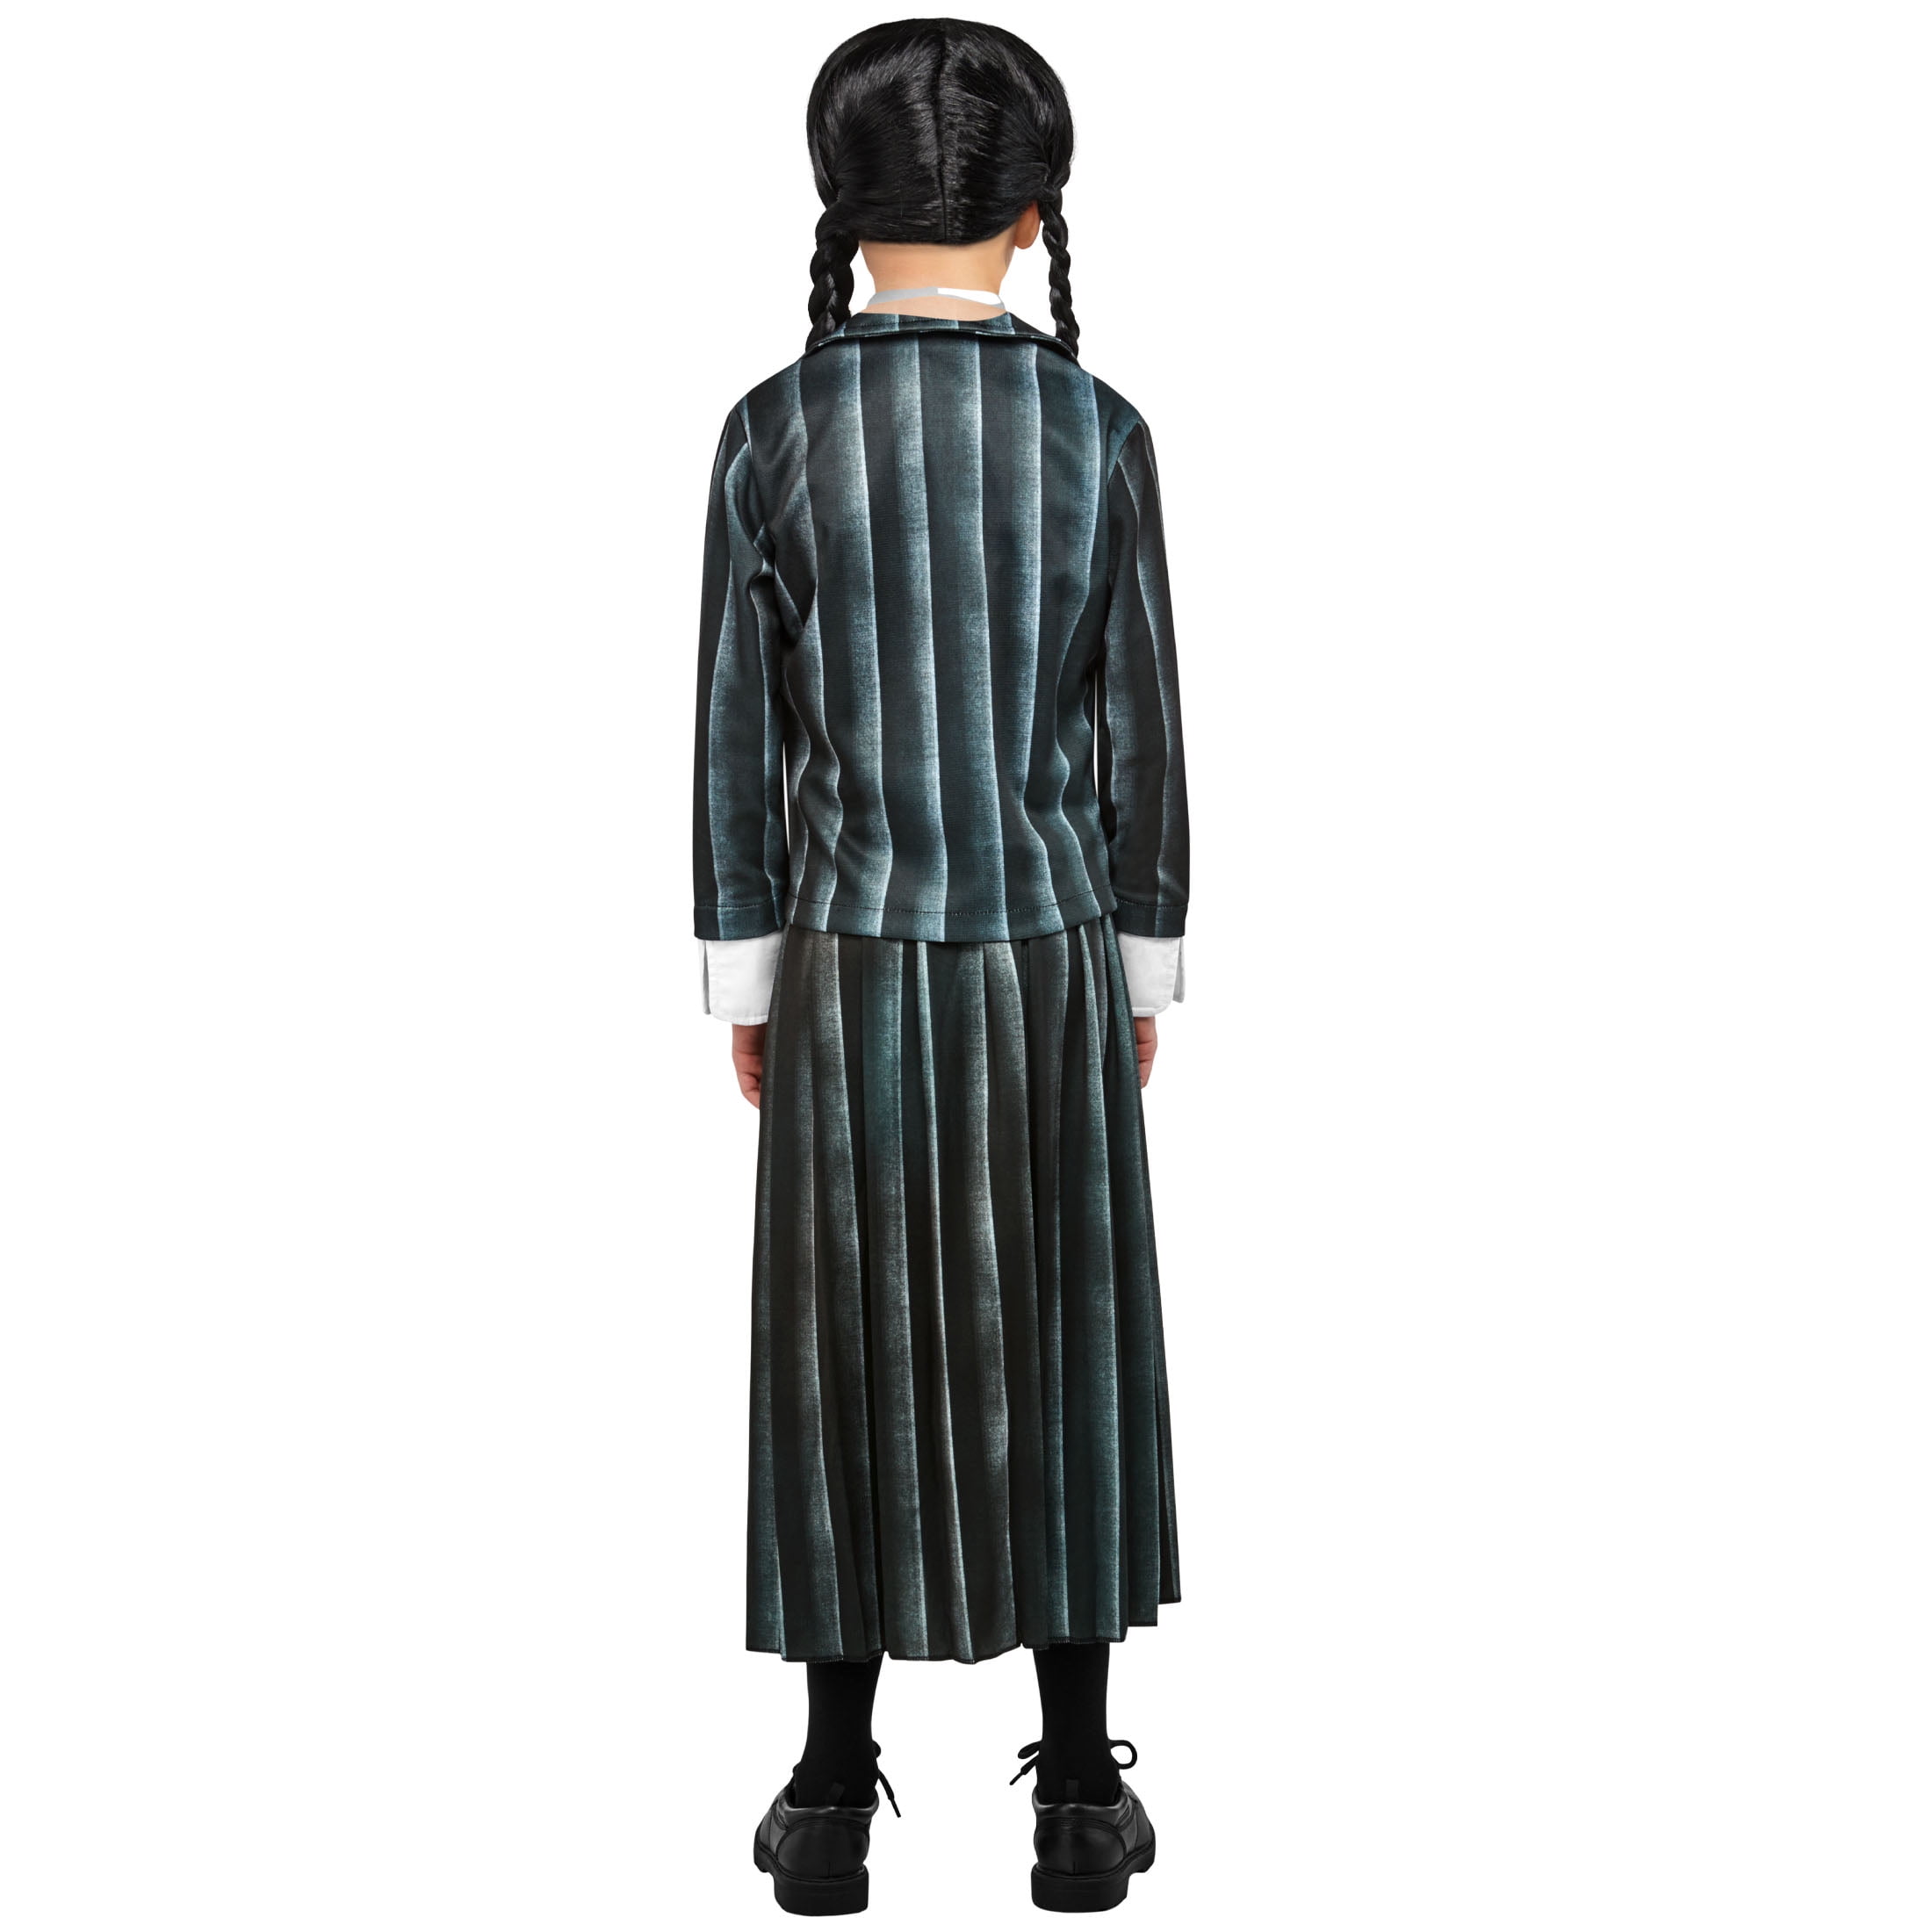 Girl's The Addams Family 2 Wednesday Costume